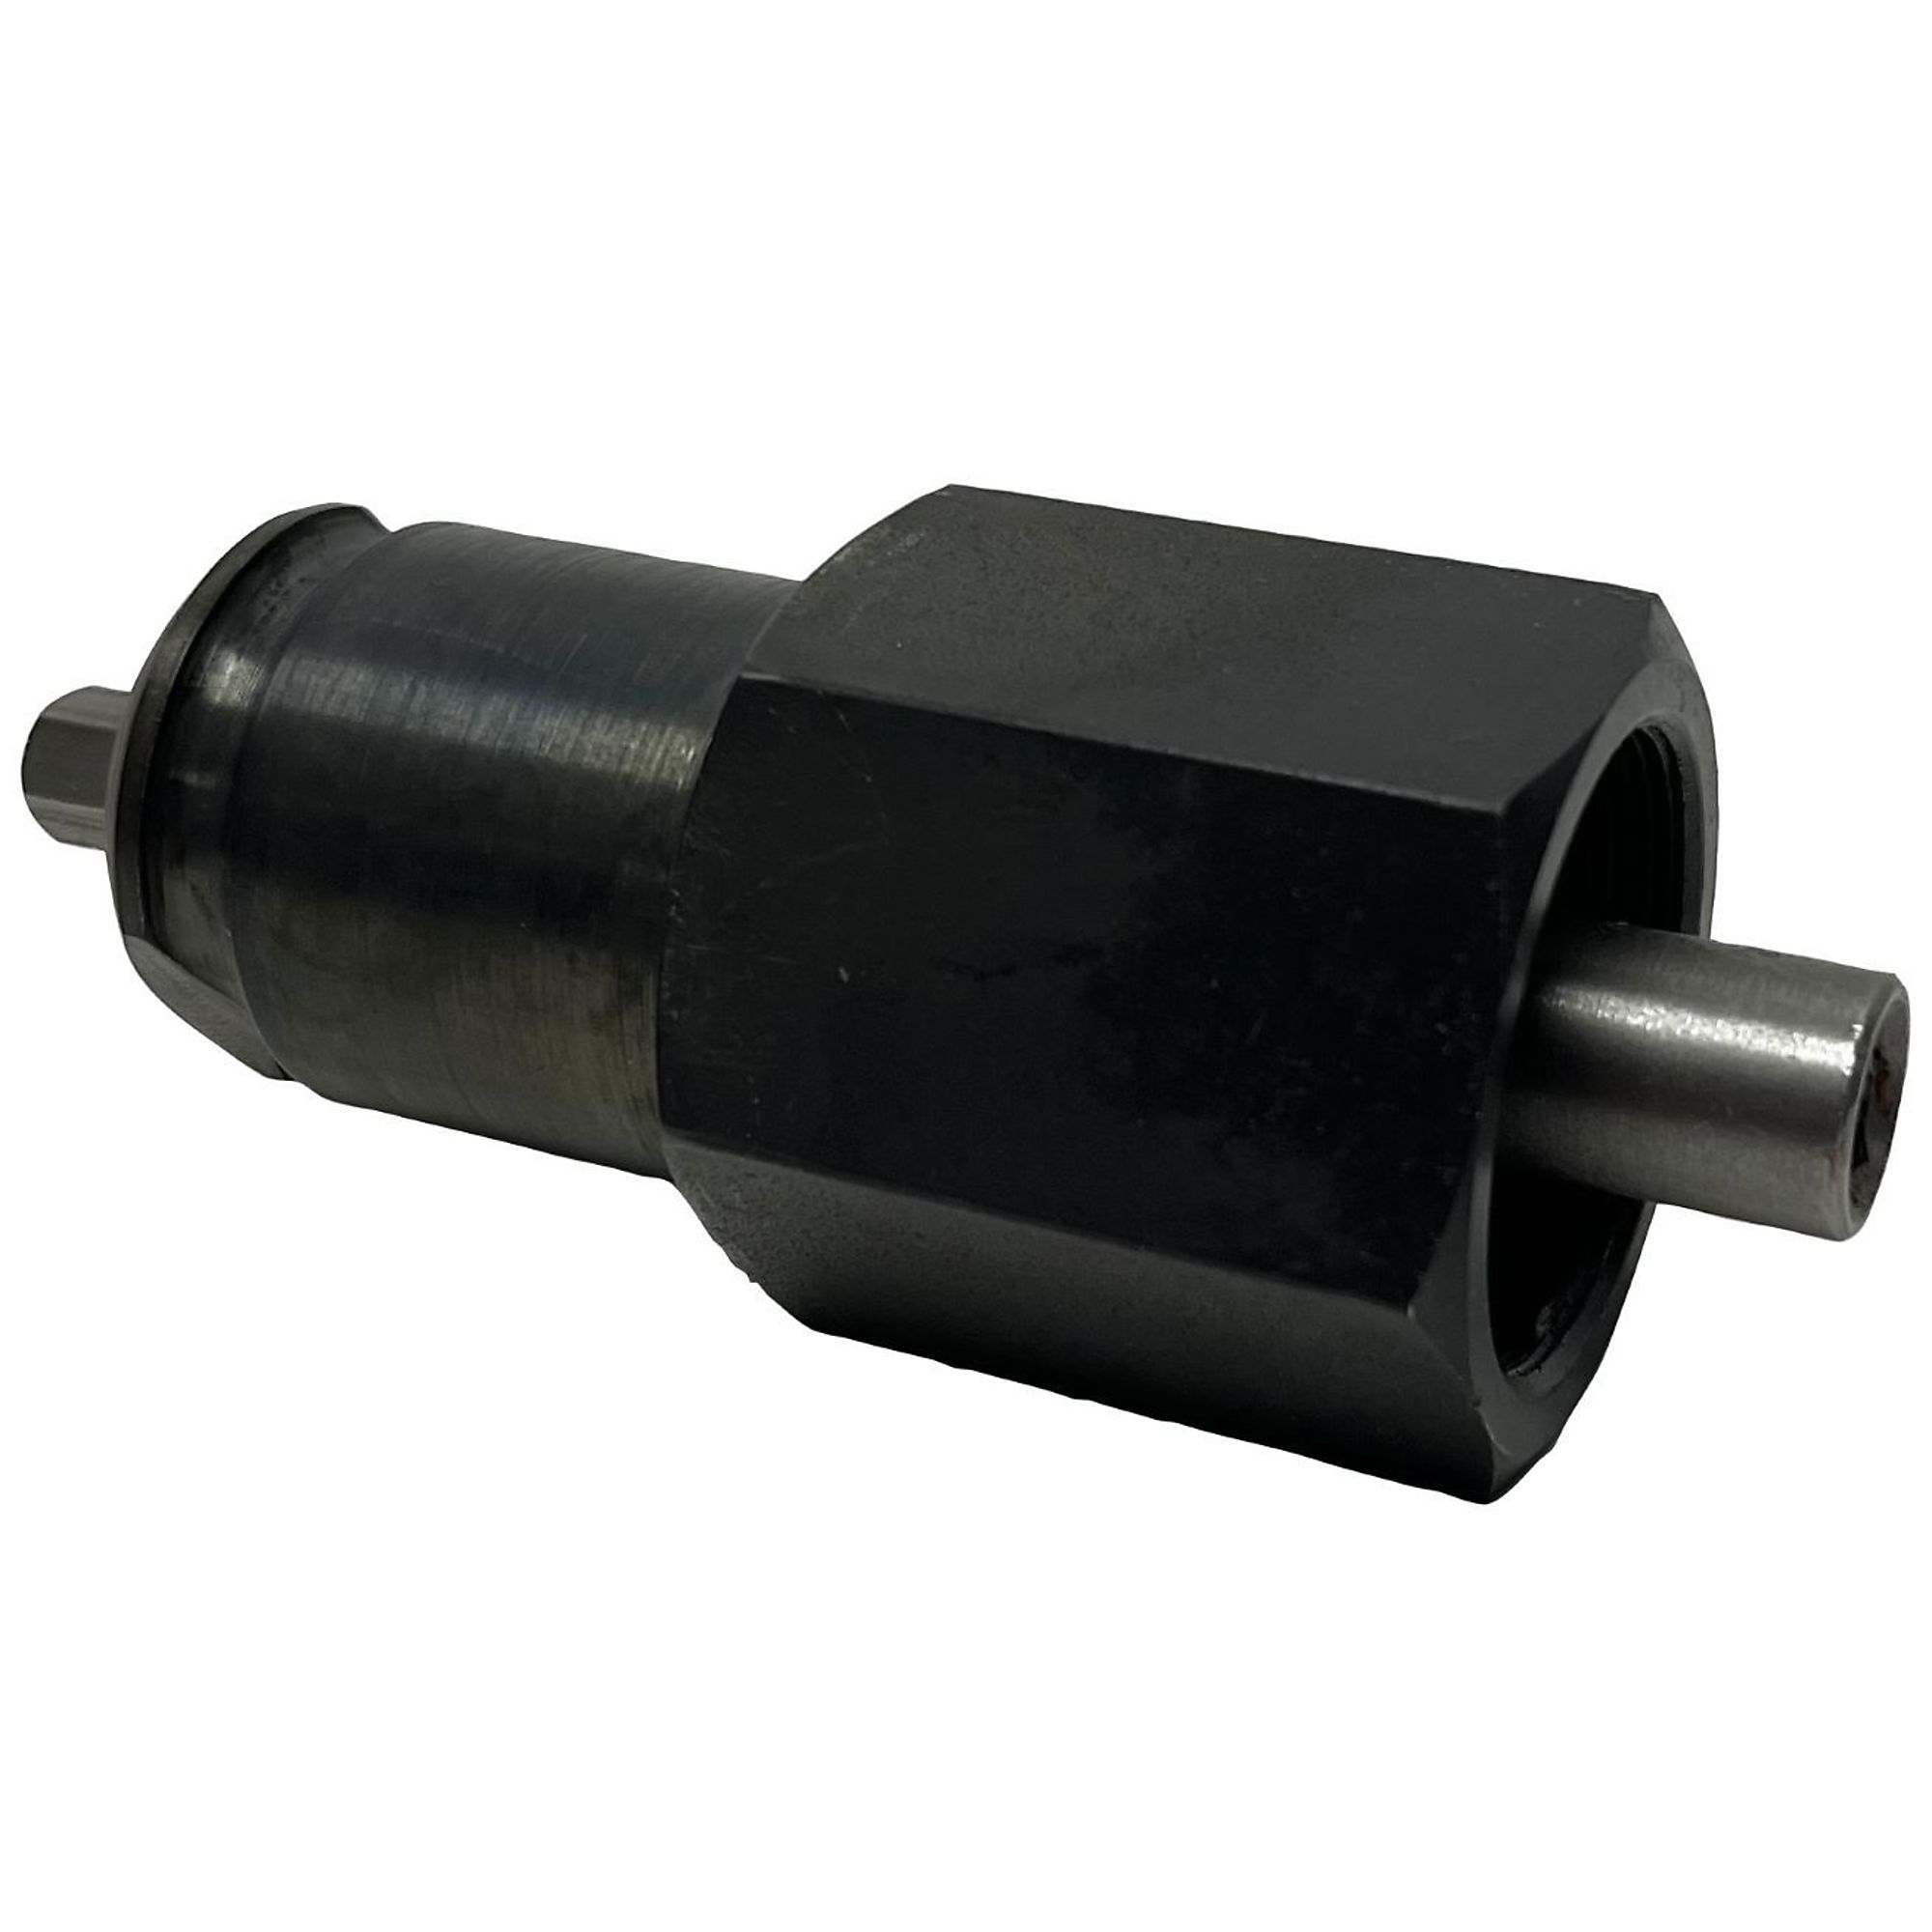 Wyco, Male Quick Disconnect Adaptor, Model W423-500